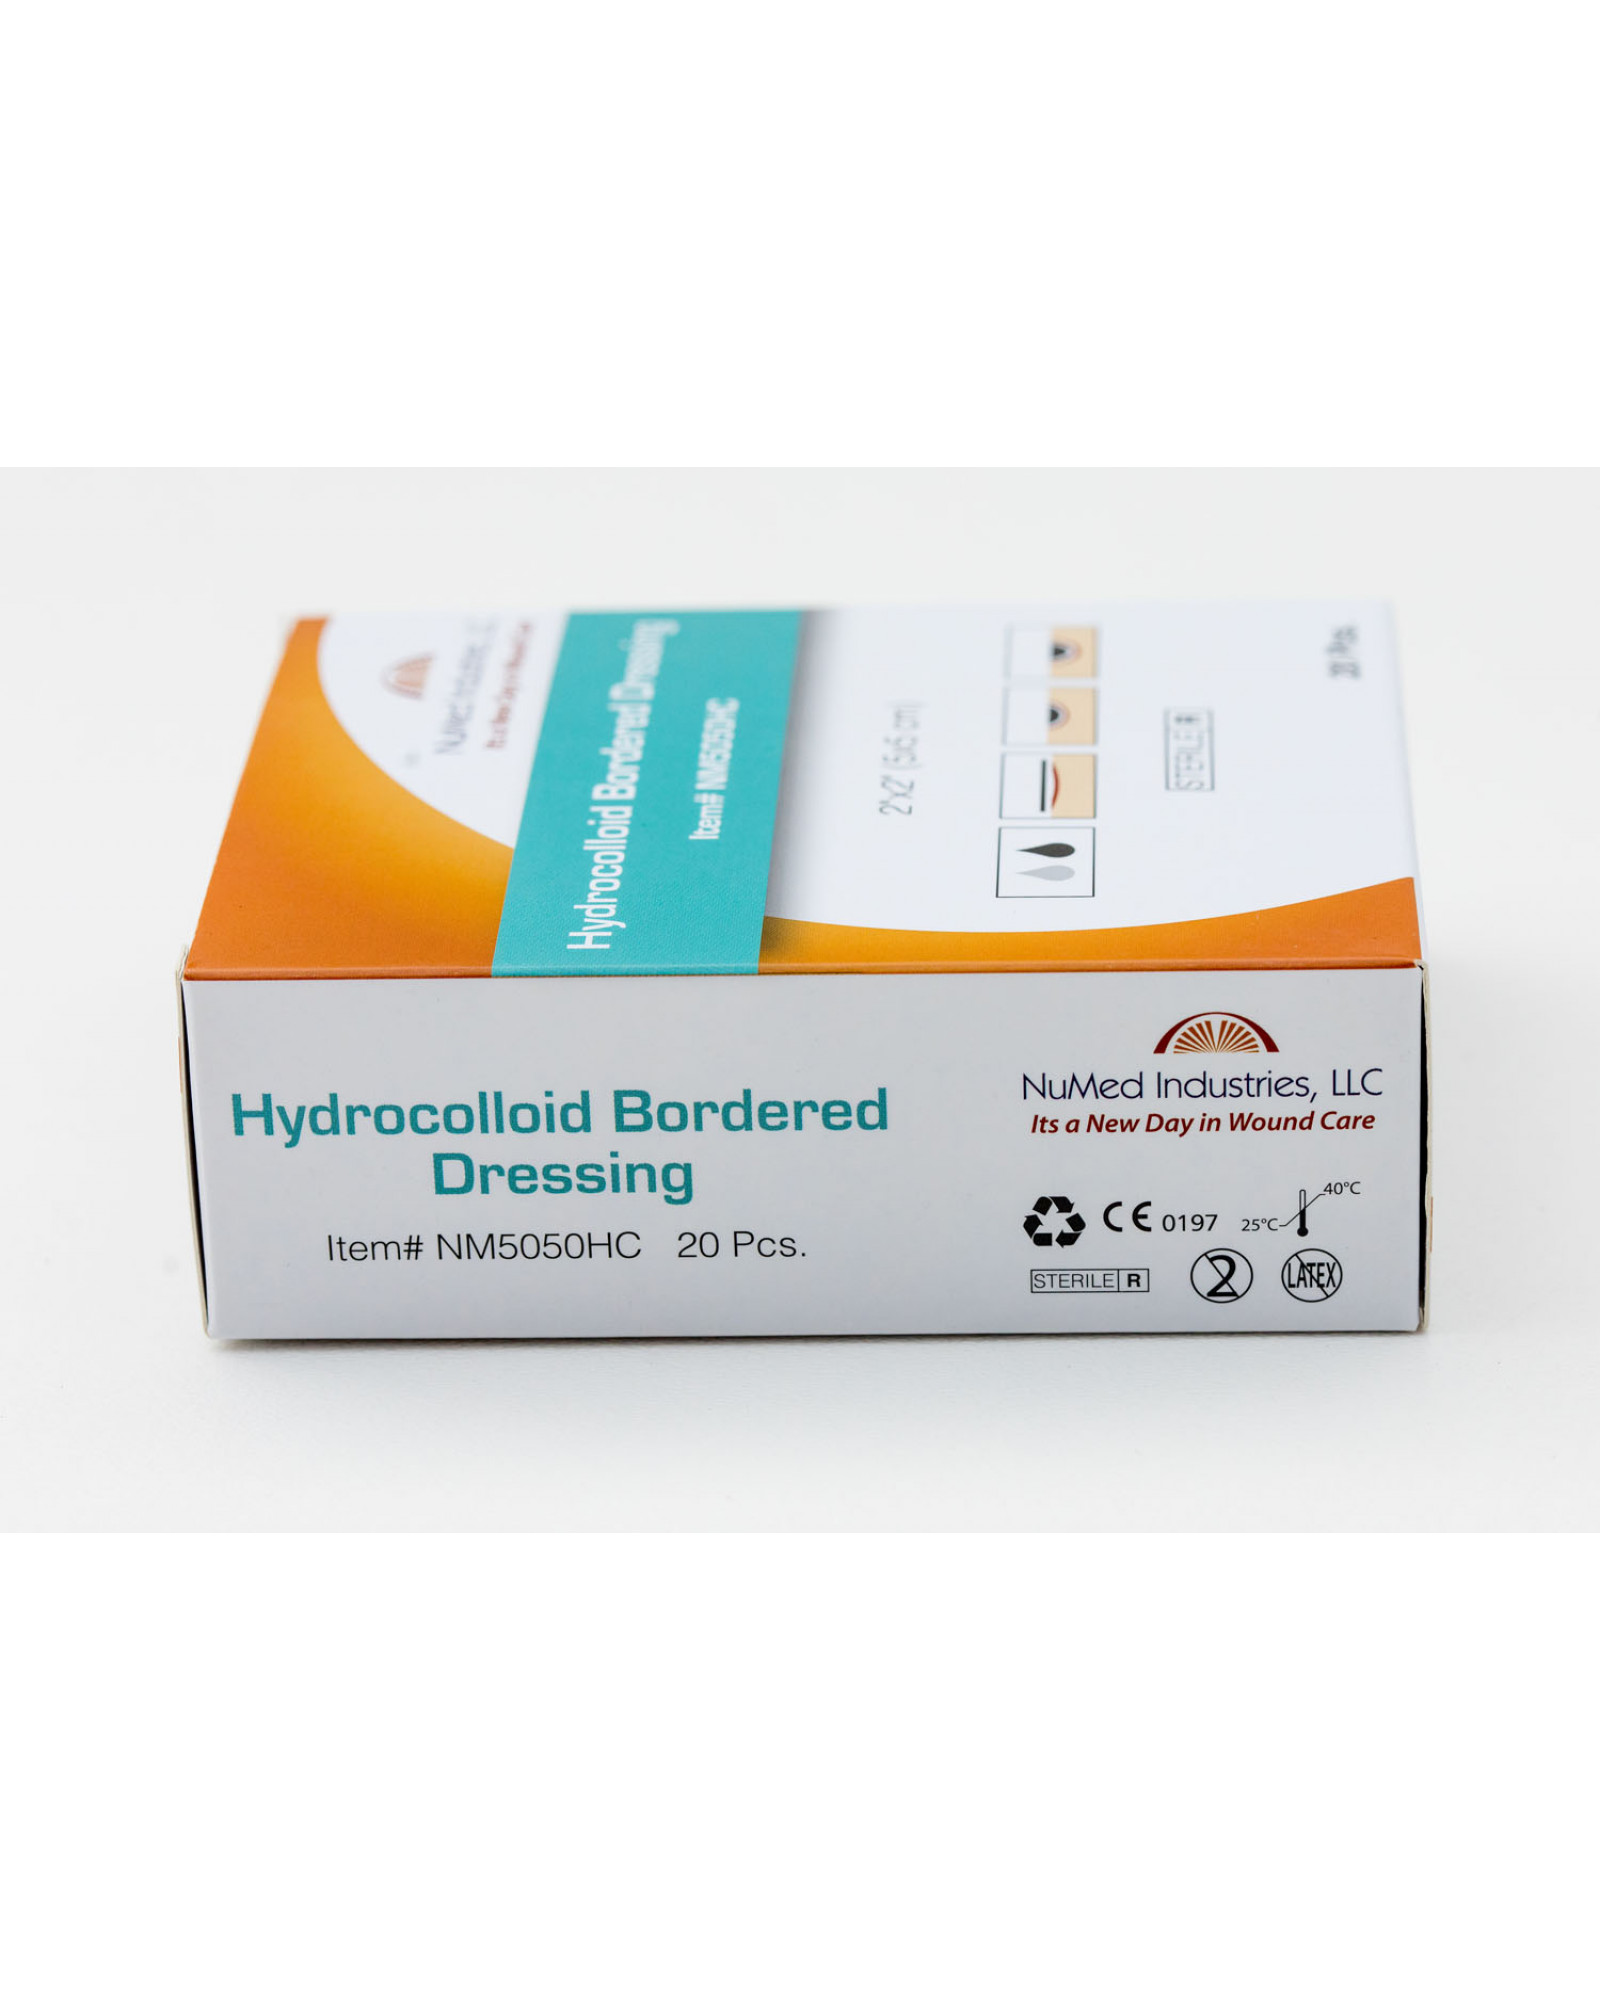 NuMed Hydrocolloid Bordered Dressing